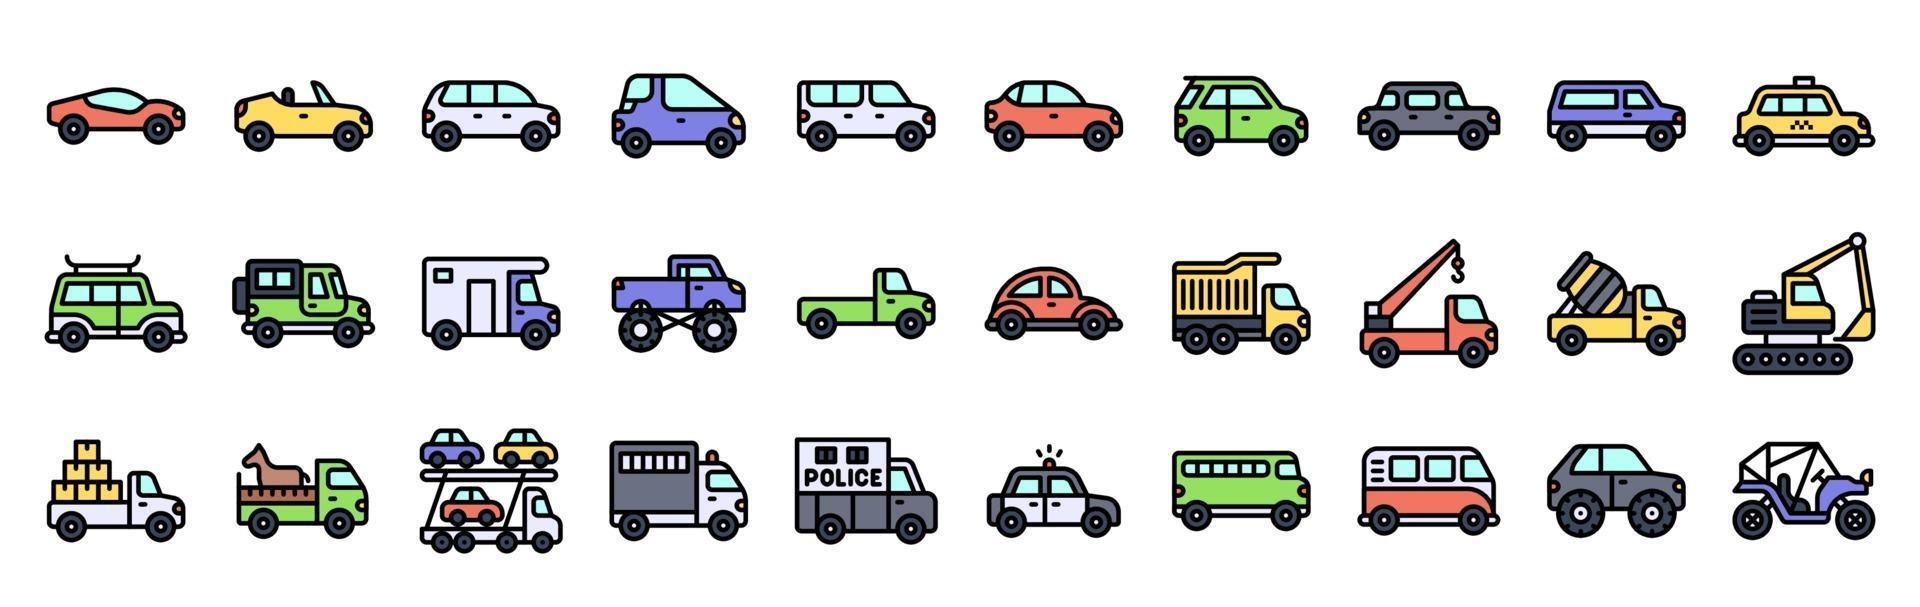 Transportation related vector icon set, filled style